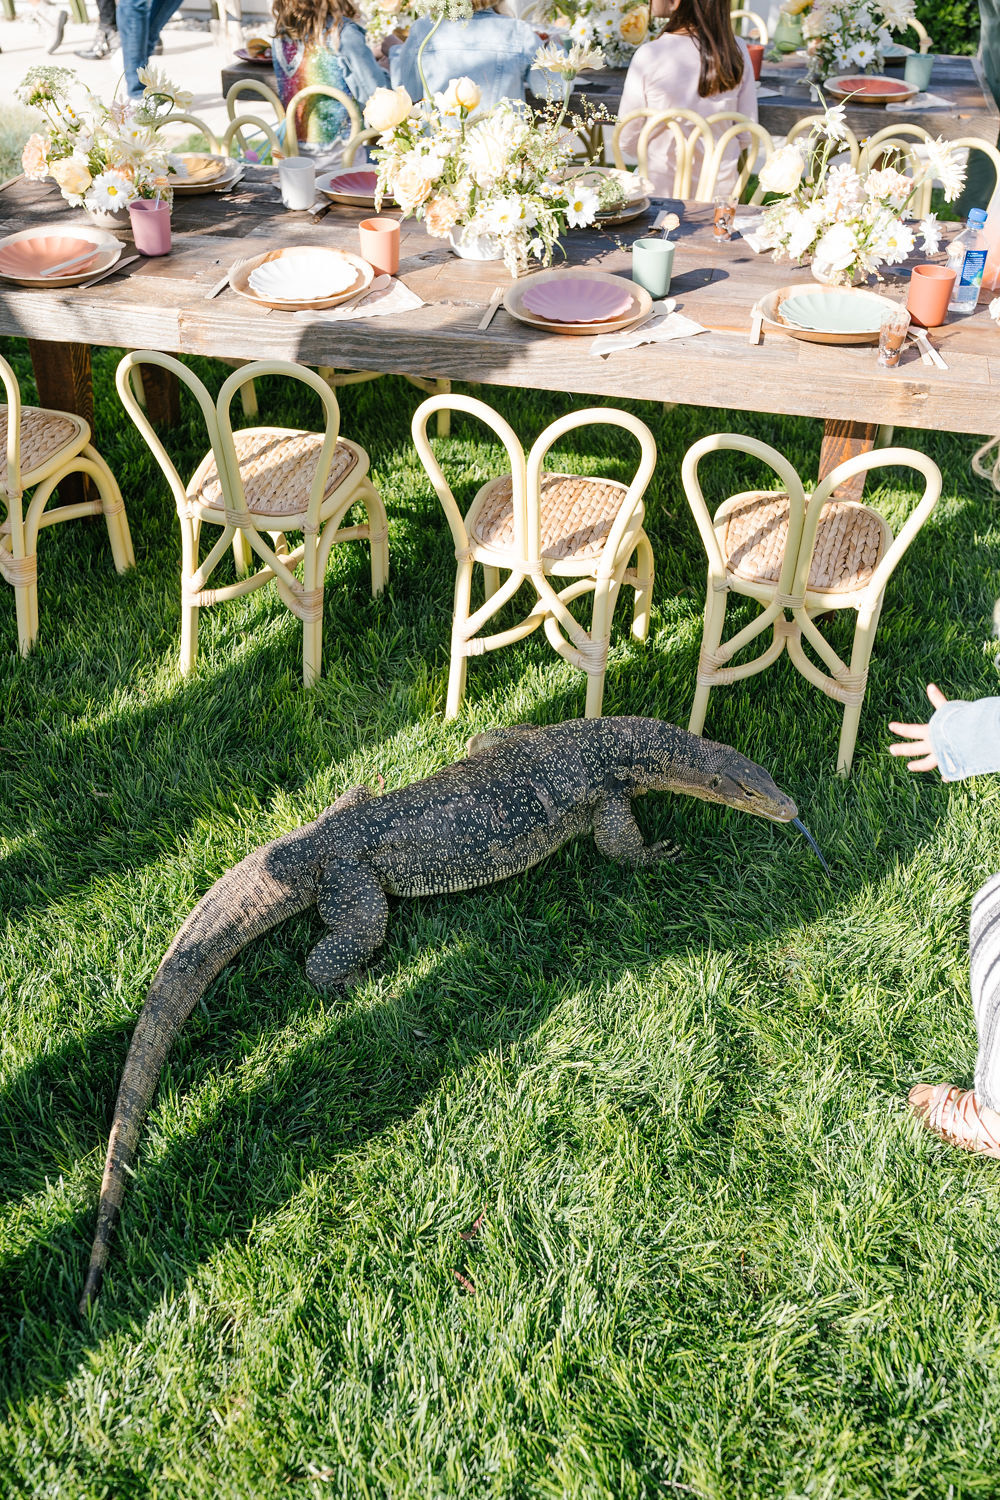 reptile petting zoo at kids birthday party